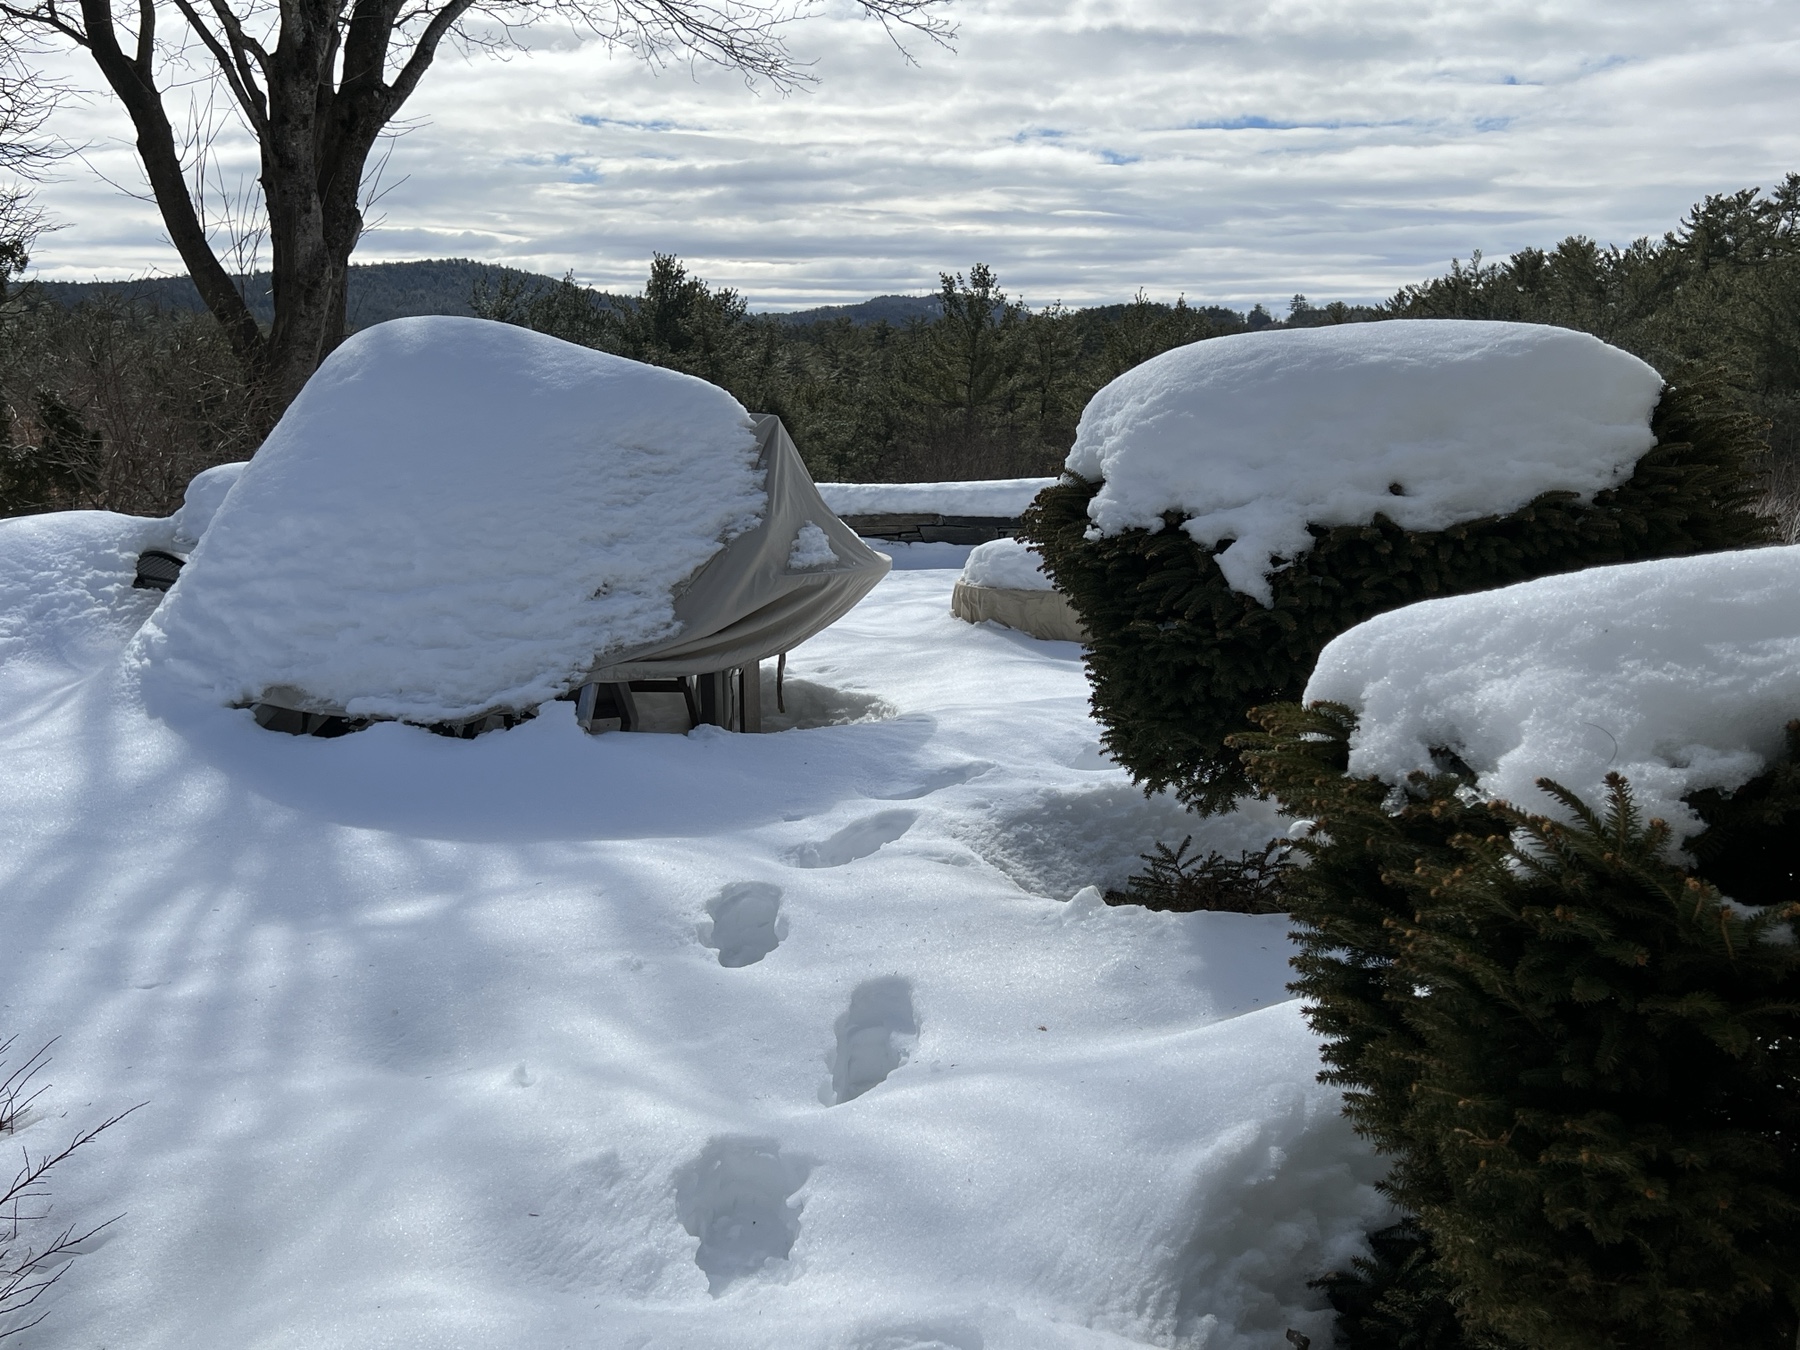 footprints across a snow-covered patio with a forest and cloudy sky in background